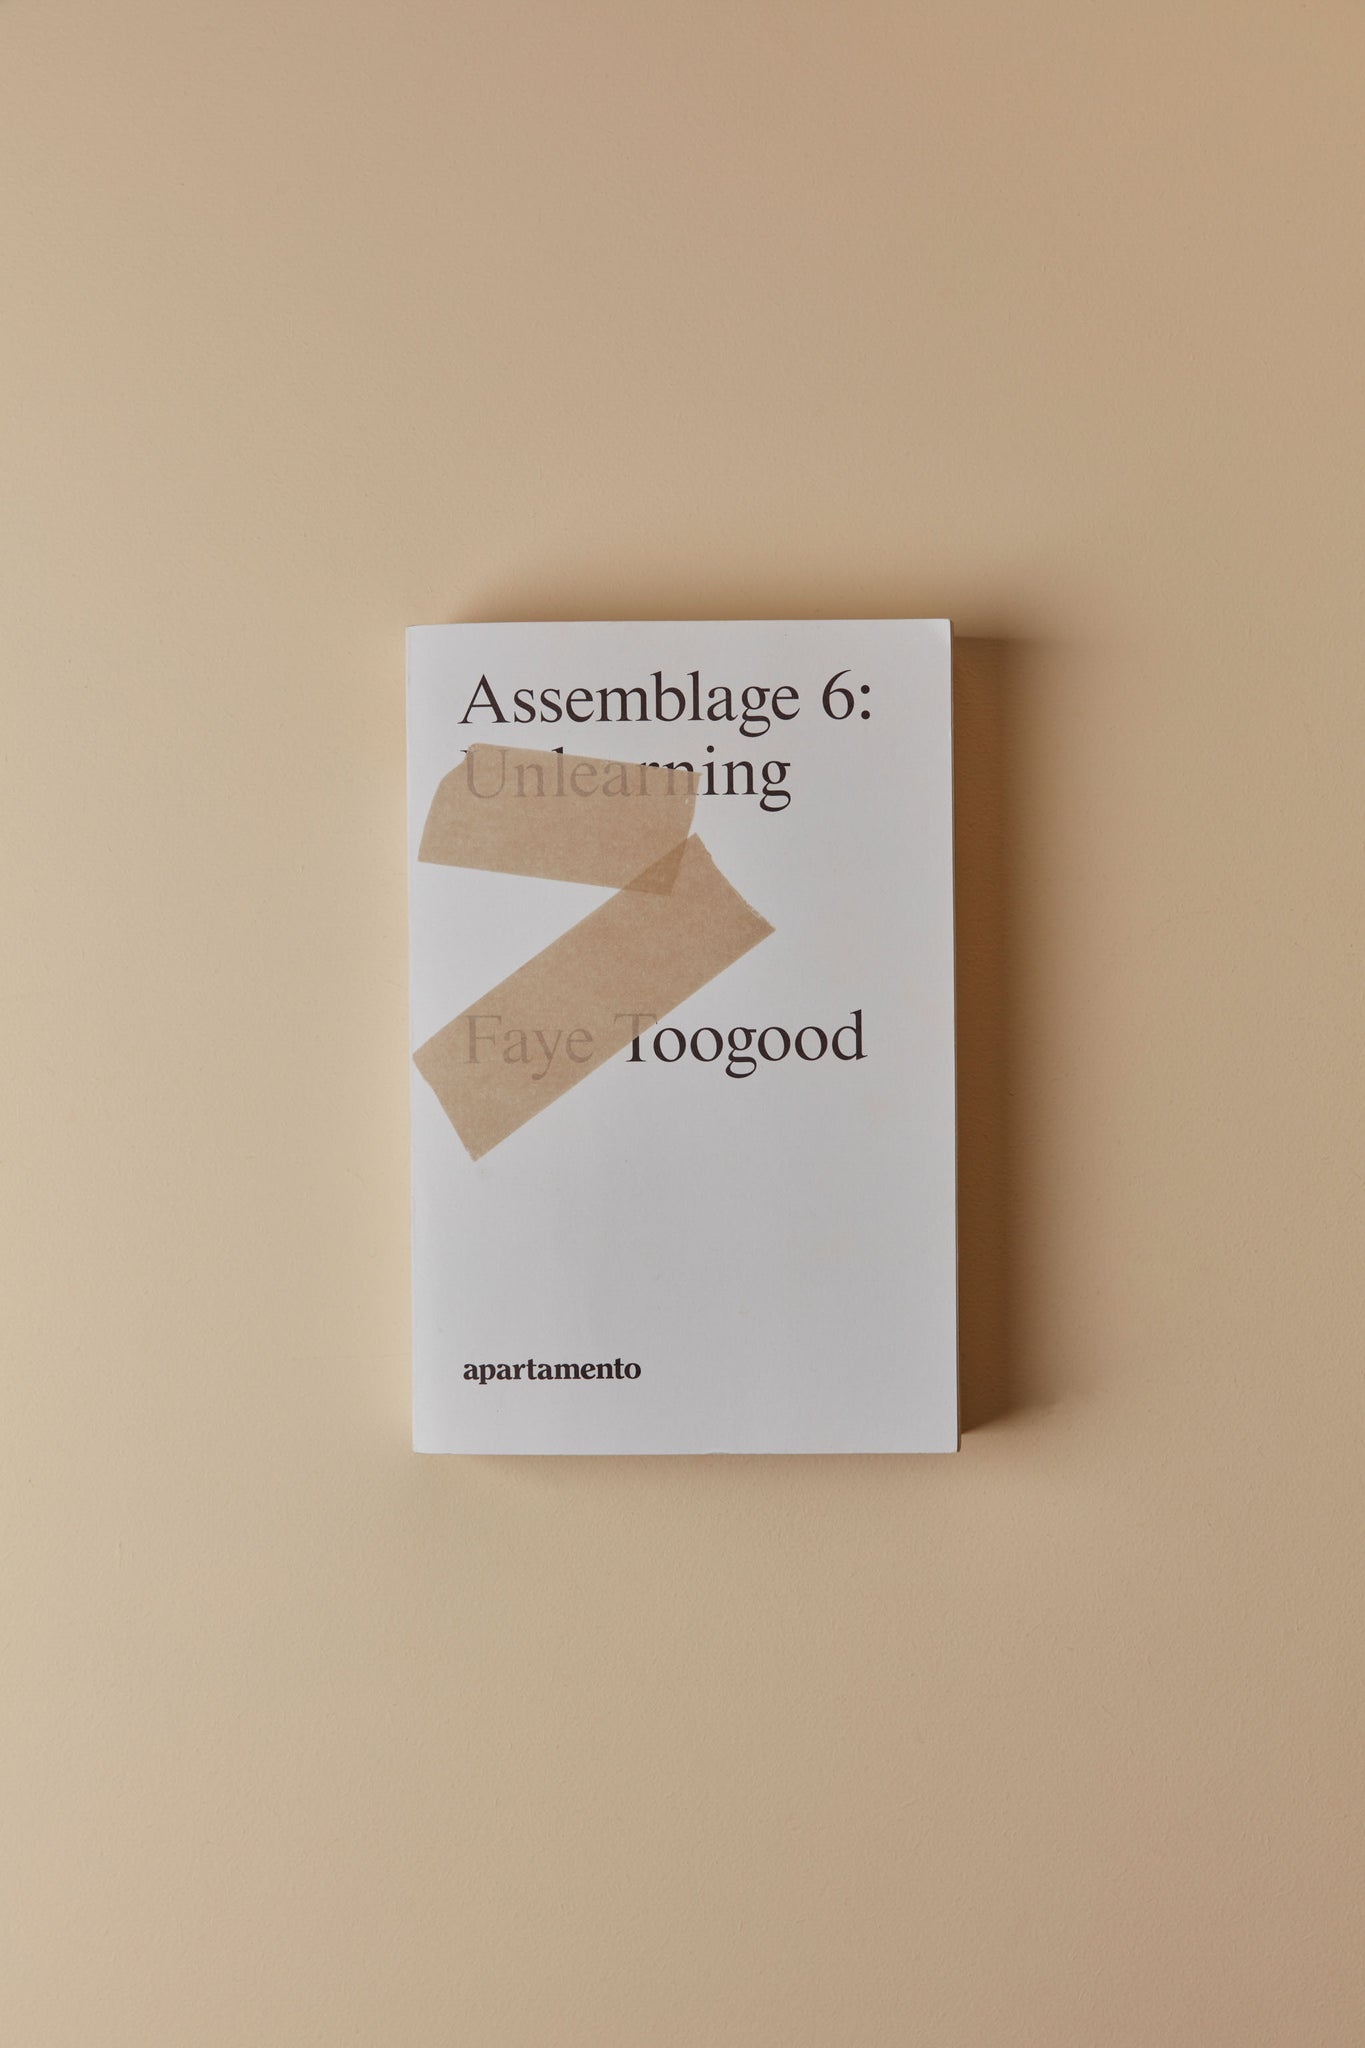 Assemblage 6: Unlearning, Faye Toogood